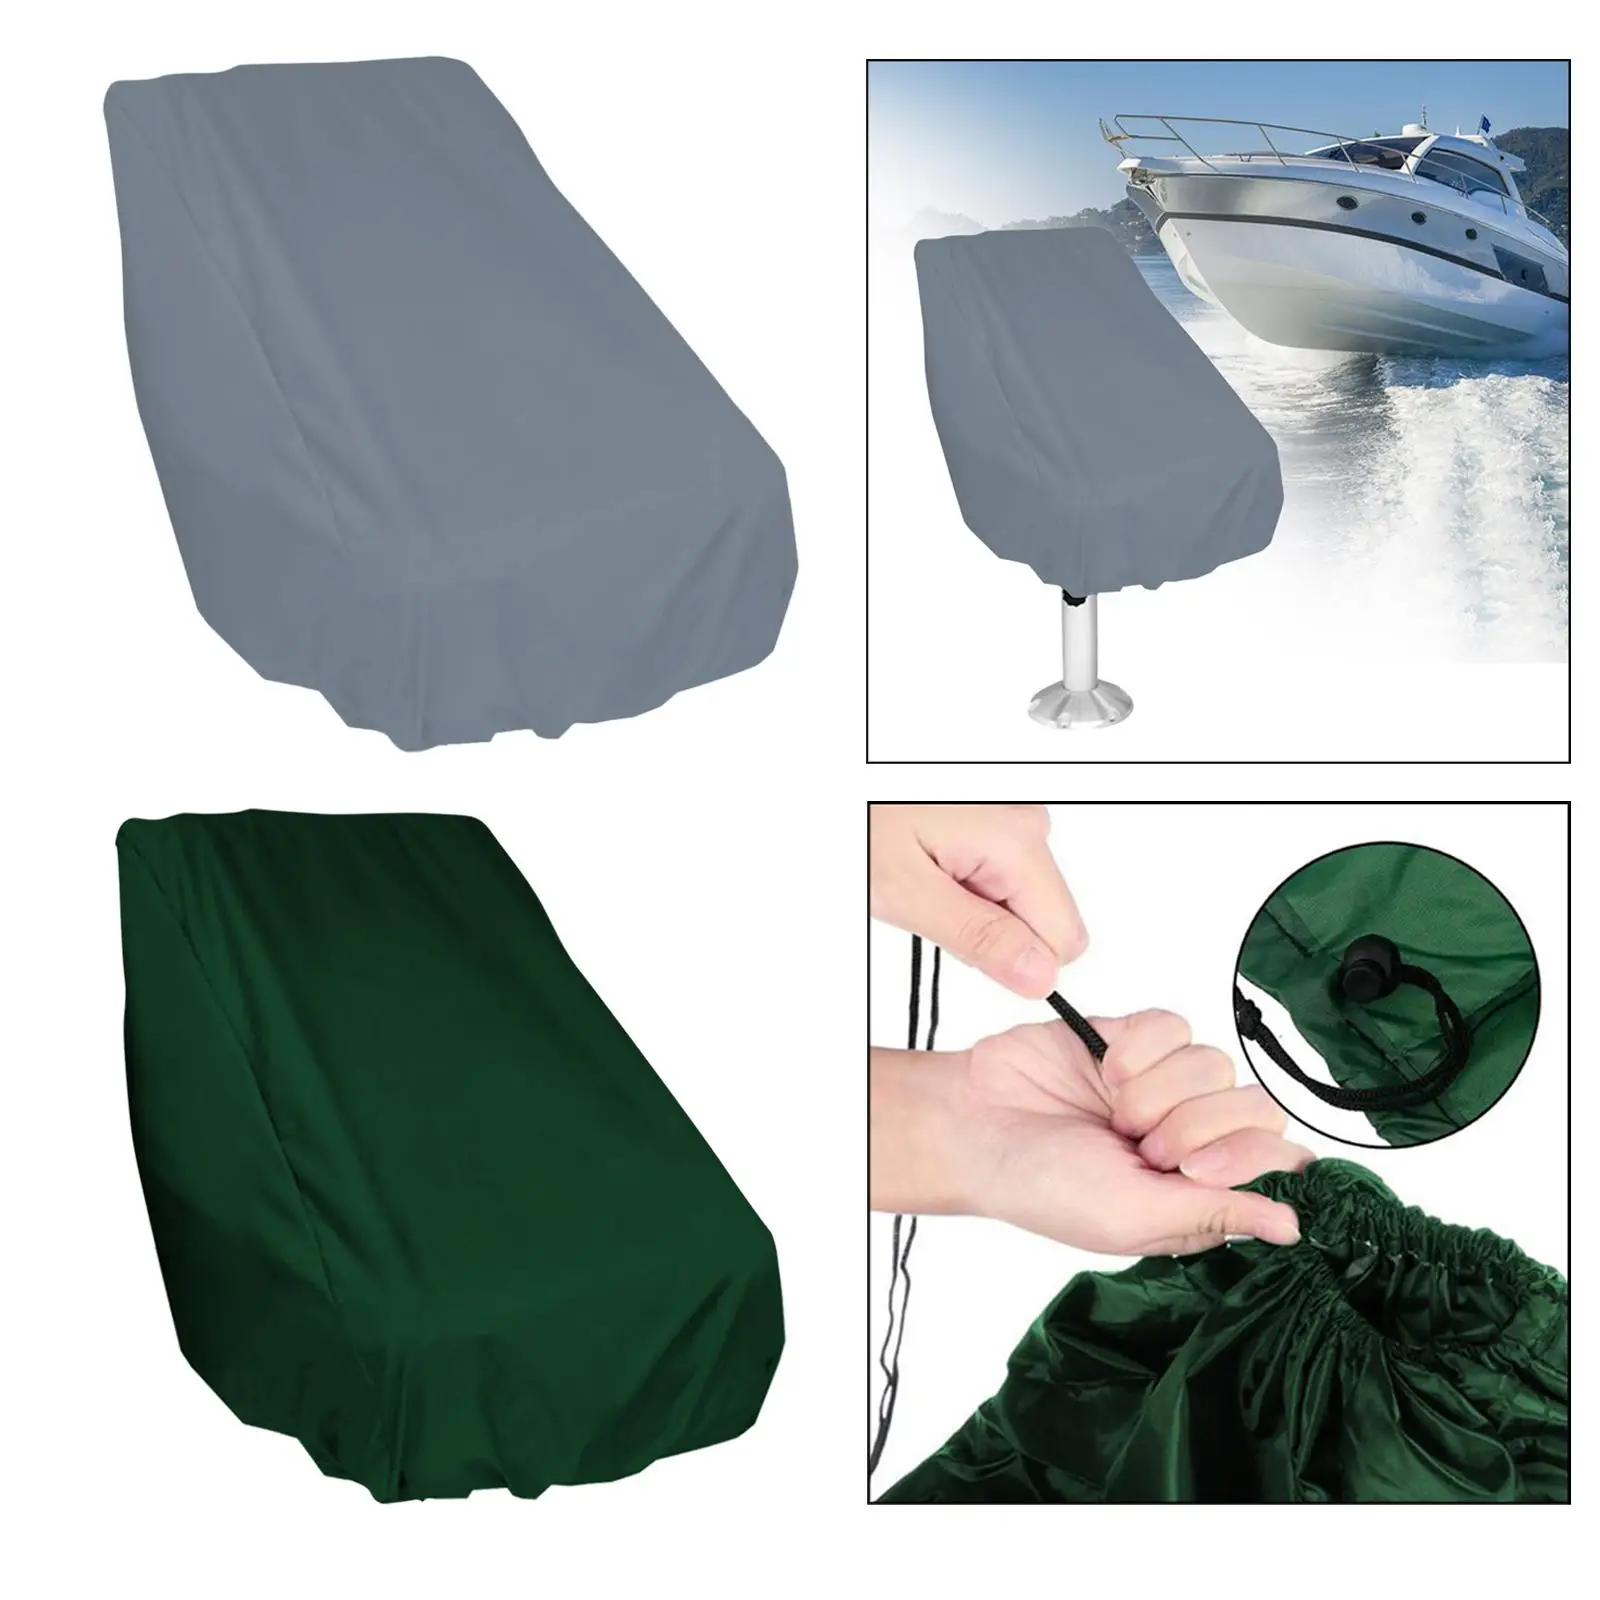 Boat Seat Cover UV Resistant Boat Chair Seat Cover Durable Captain`s Chair Cover Waterproof Outdoor Helm Chair Protective Covers